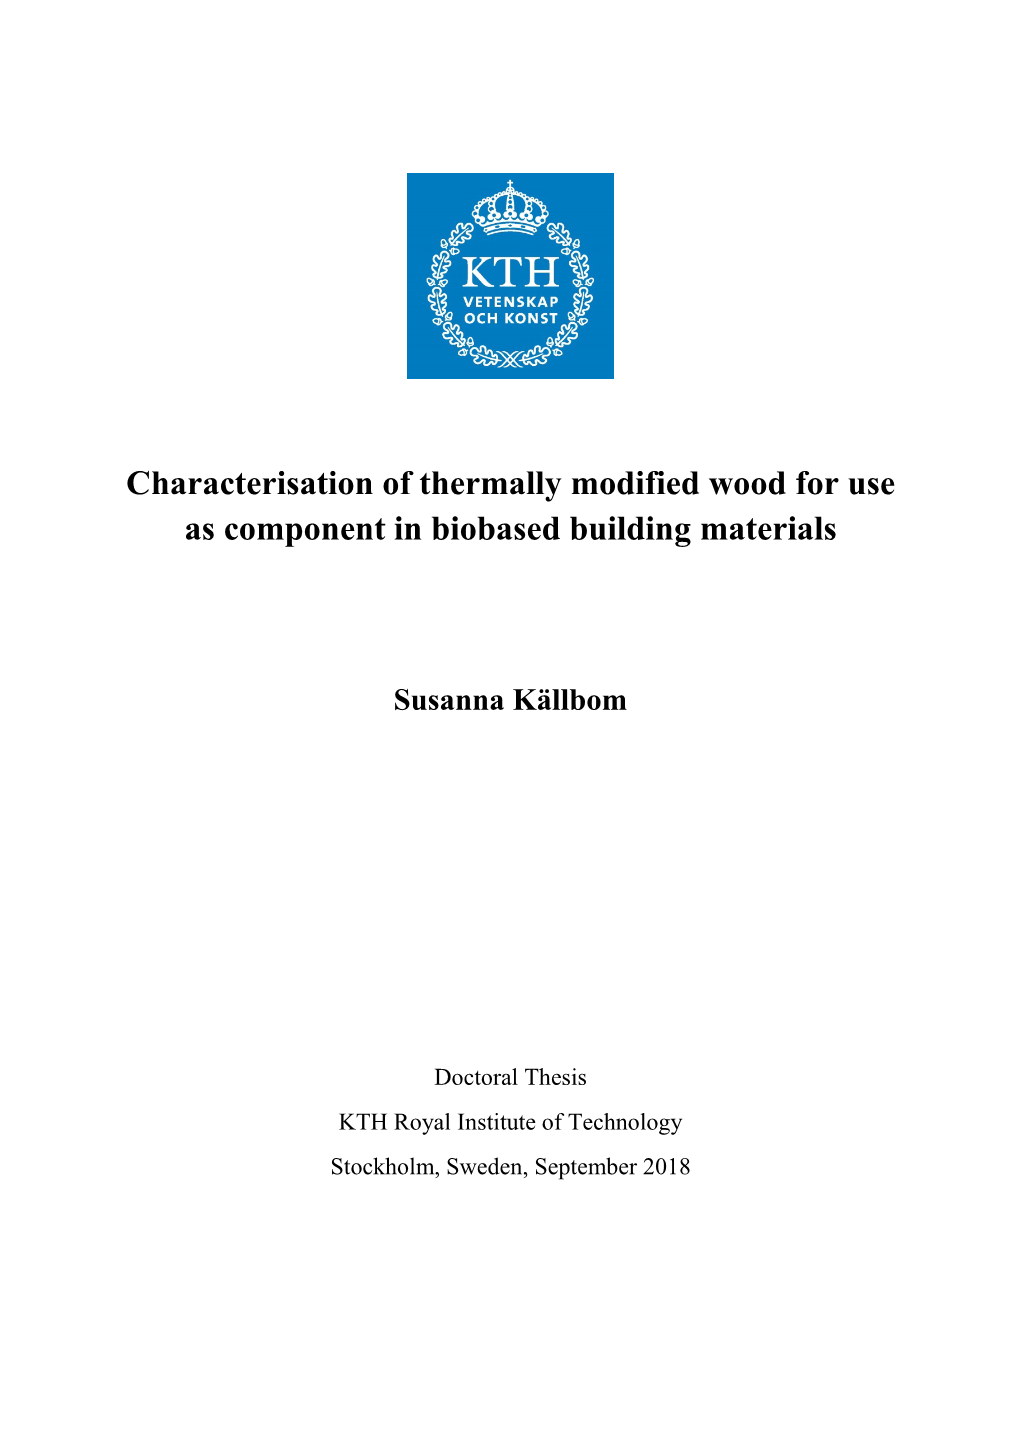 Characterisation of Thermally Modified Wood for Use As Component in Biobased Building Materials